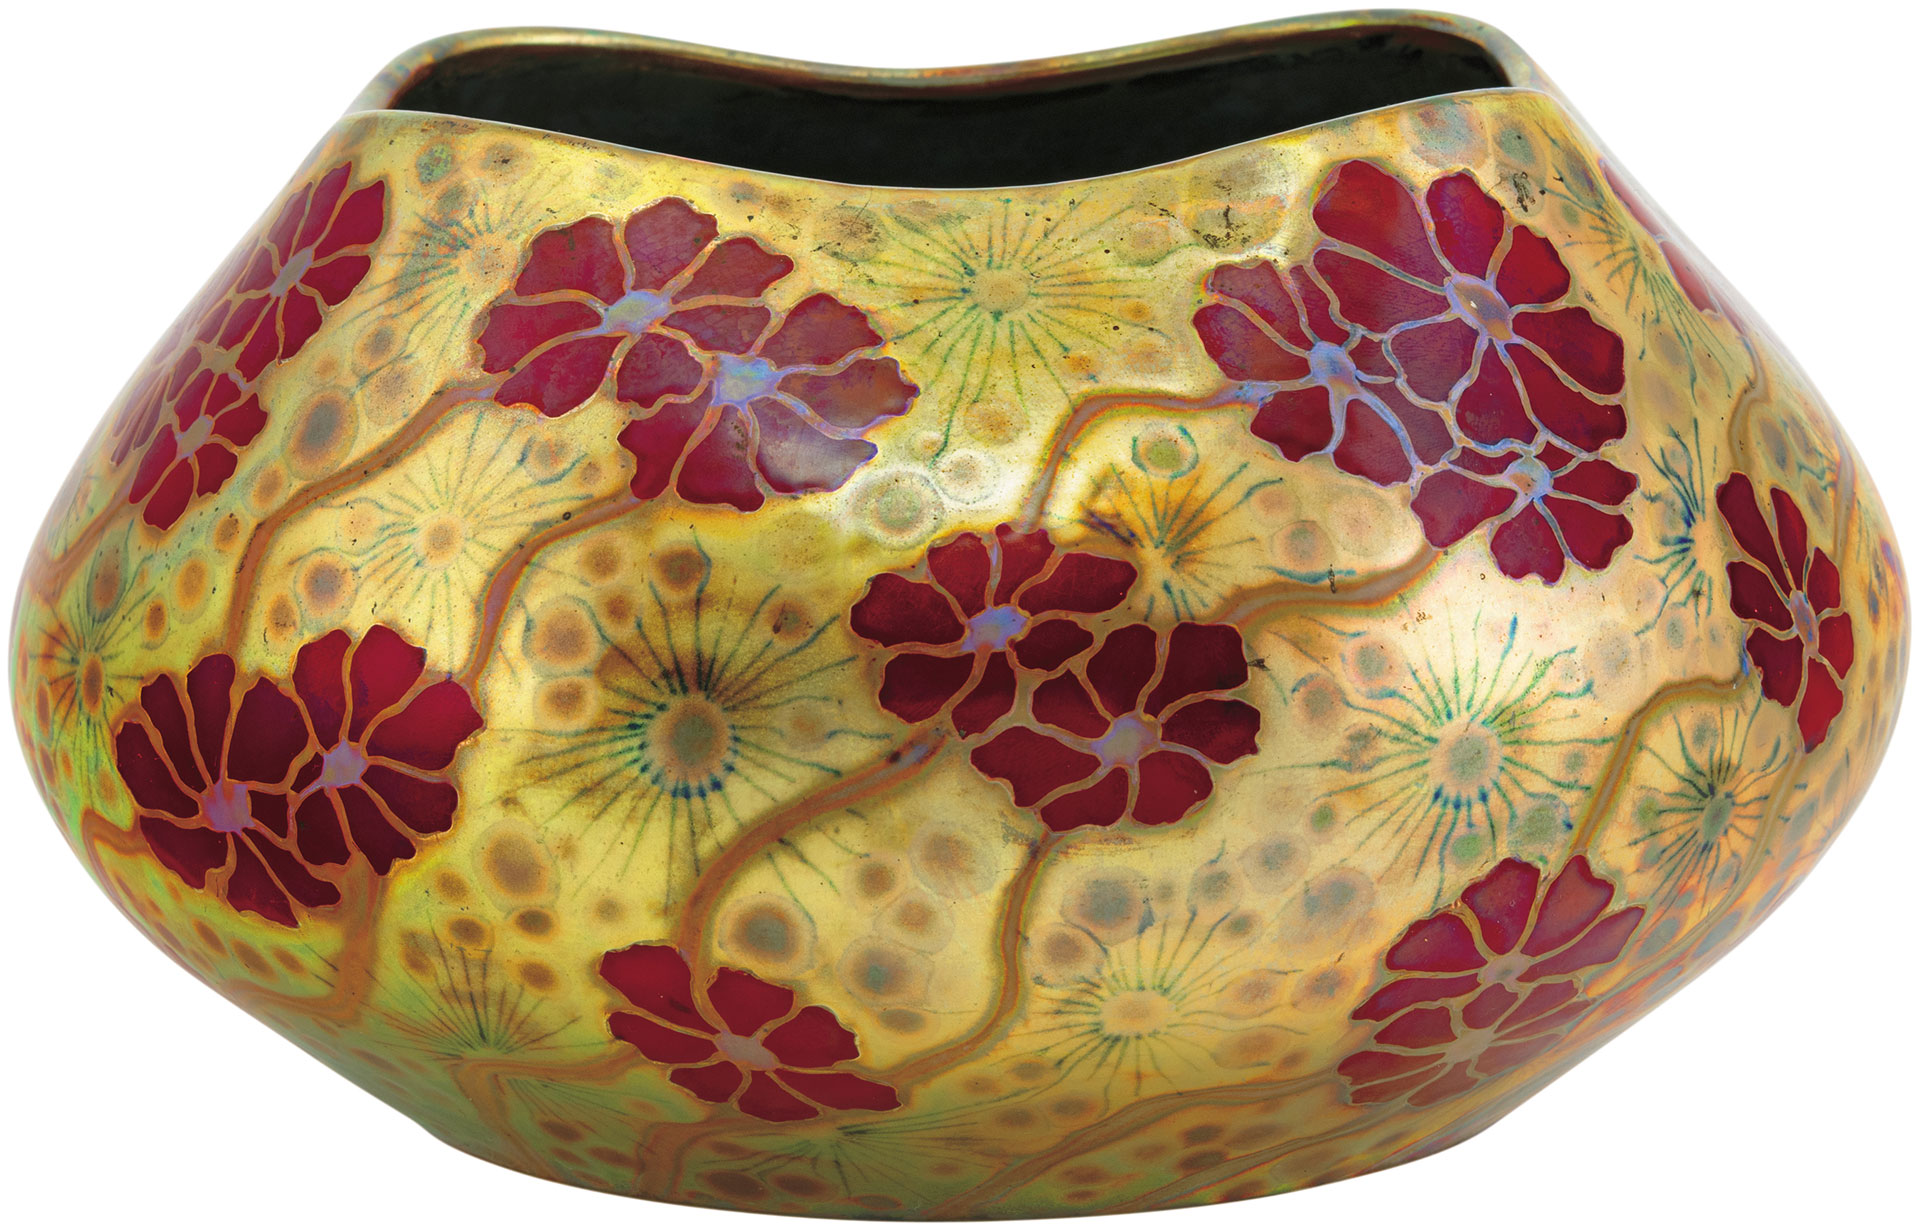 Zsolnay Cachepot, decorated with Flowers, Zsolnay, 1904